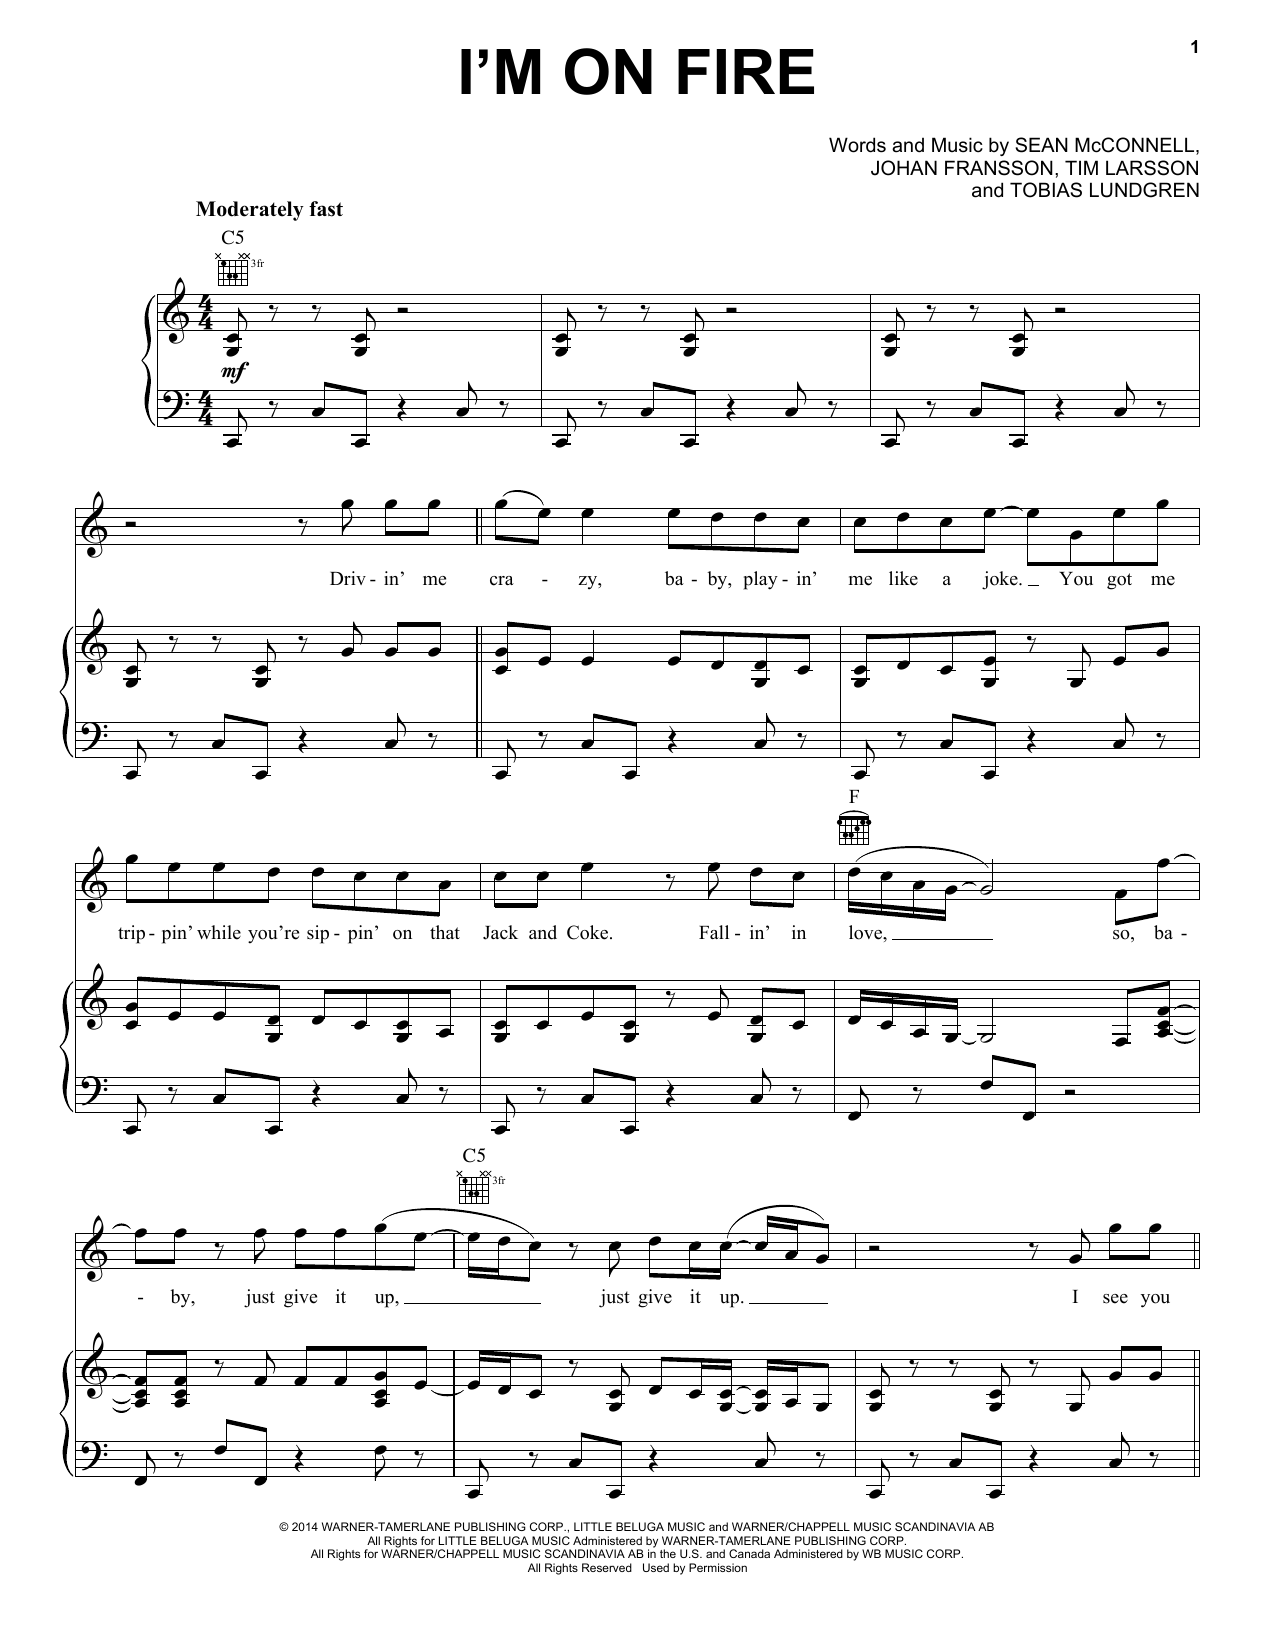 i see fire music sheet vocal and piano music sheet